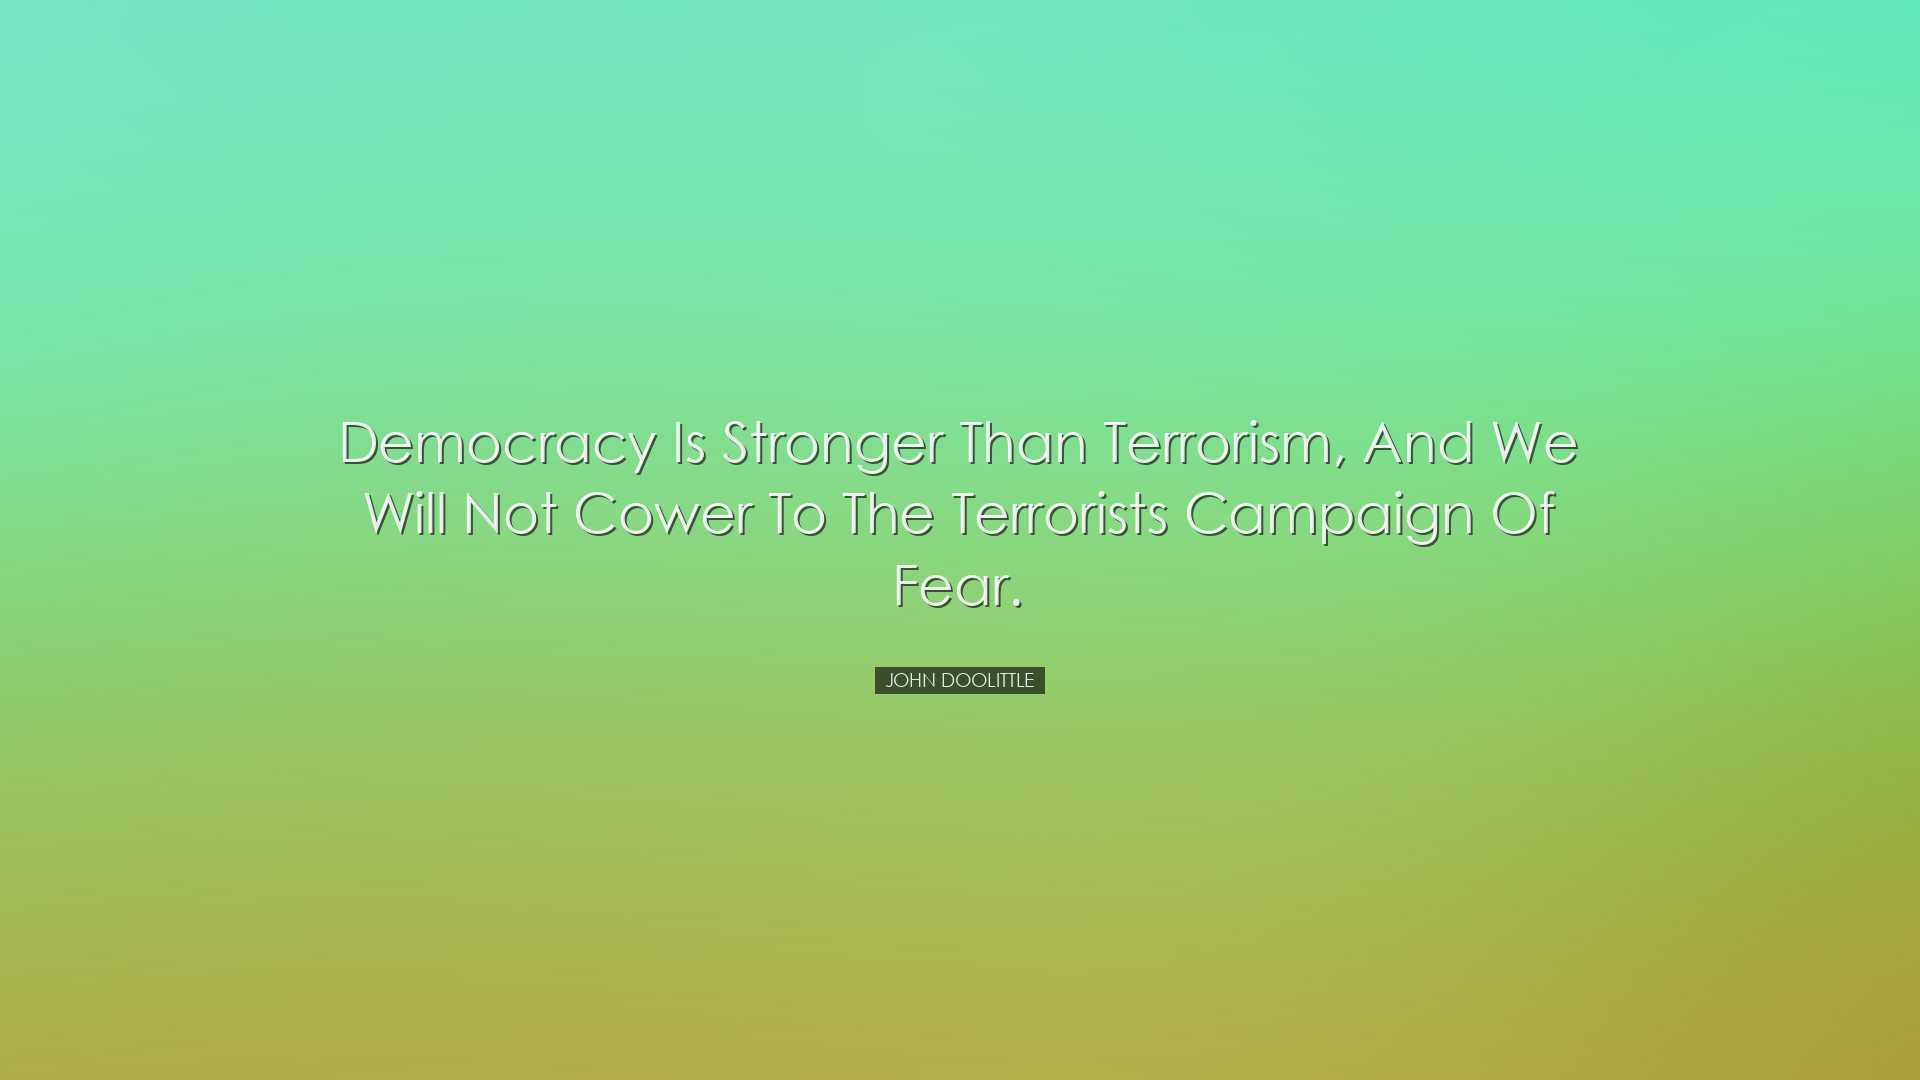 Democracy is stronger than terrorism, and we will not cower to the